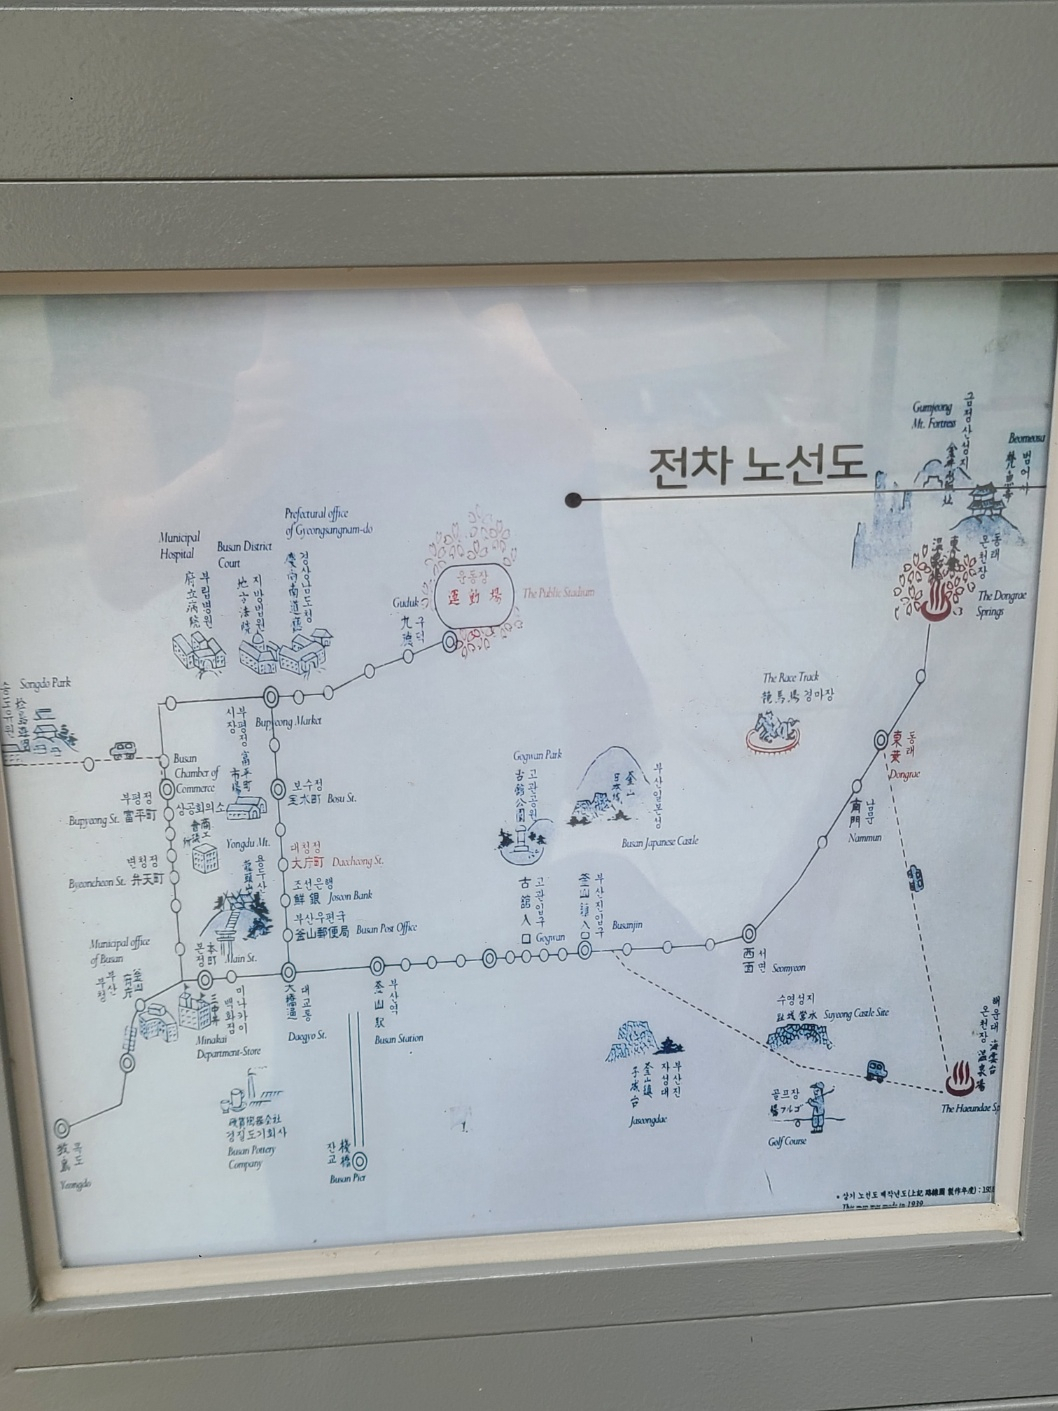 An old hand-drawn map depicting the route of the Oncheonjang streetcar established in 1915 (Jung Min-kyung/ The Korea Herald)